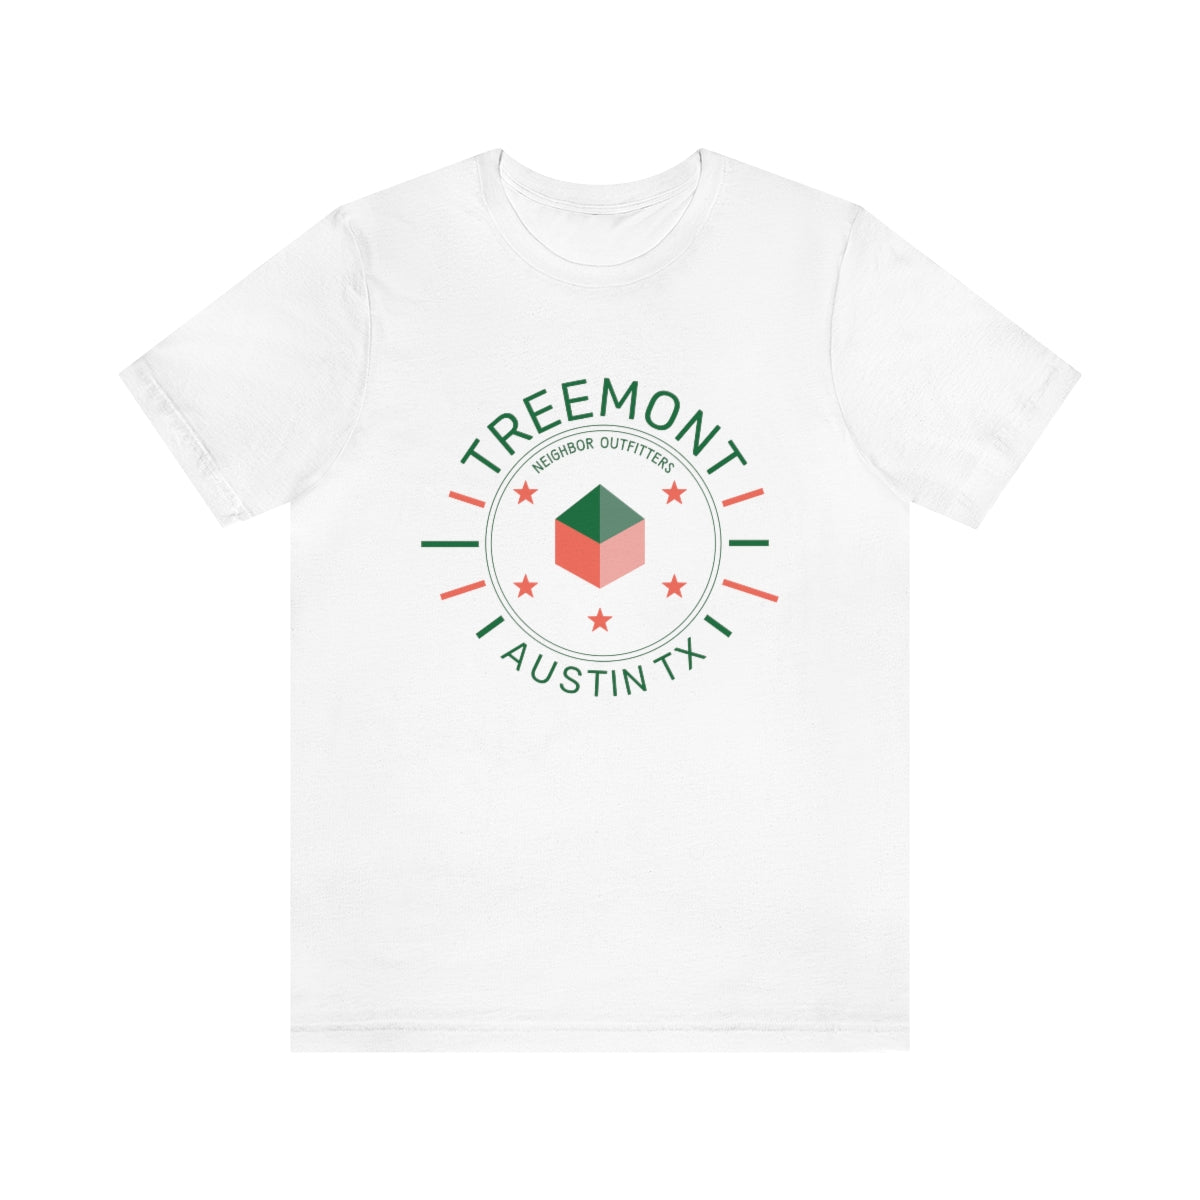 Treemont T-Shirt: "Center of the Universe"